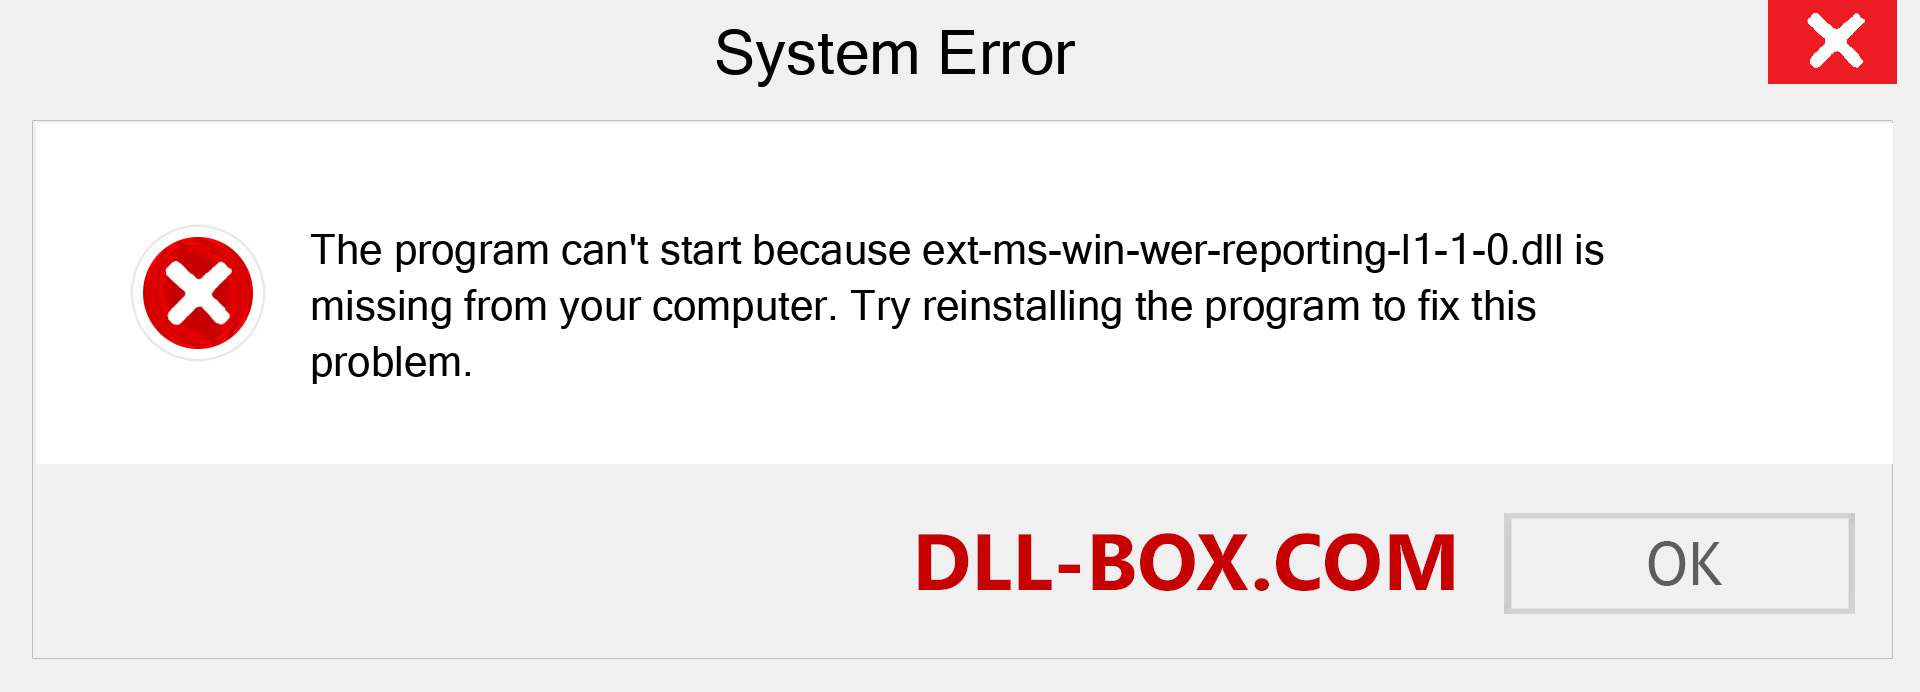  ext-ms-win-wer-reporting-l1-1-0.dll file is missing?. Download for Windows 7, 8, 10 - Fix  ext-ms-win-wer-reporting-l1-1-0 dll Missing Error on Windows, photos, images